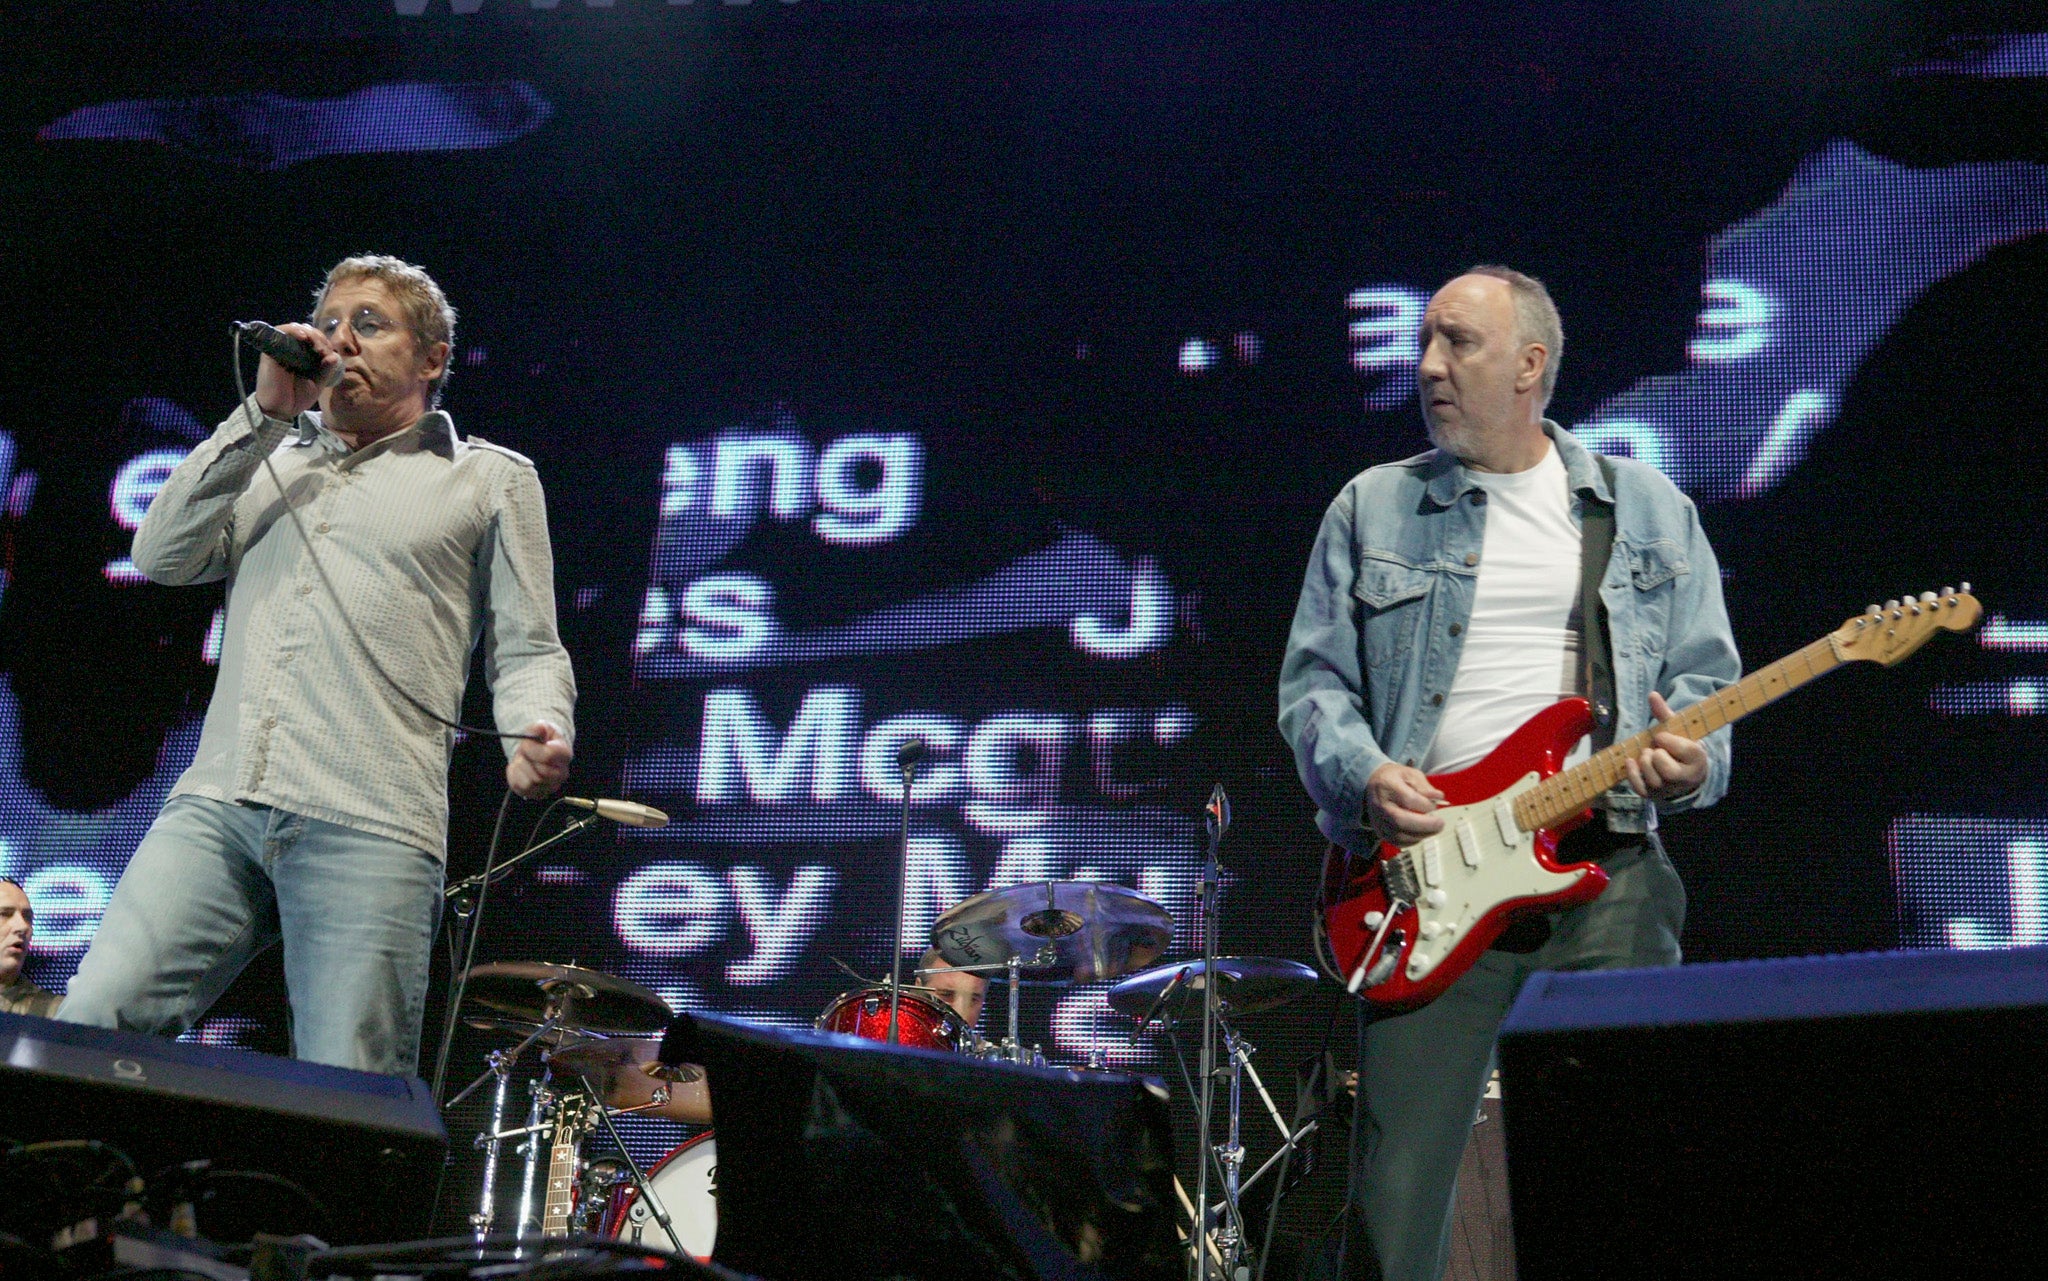 Roger Daltrey and Pete Townsend perform on stage at Live 8 London